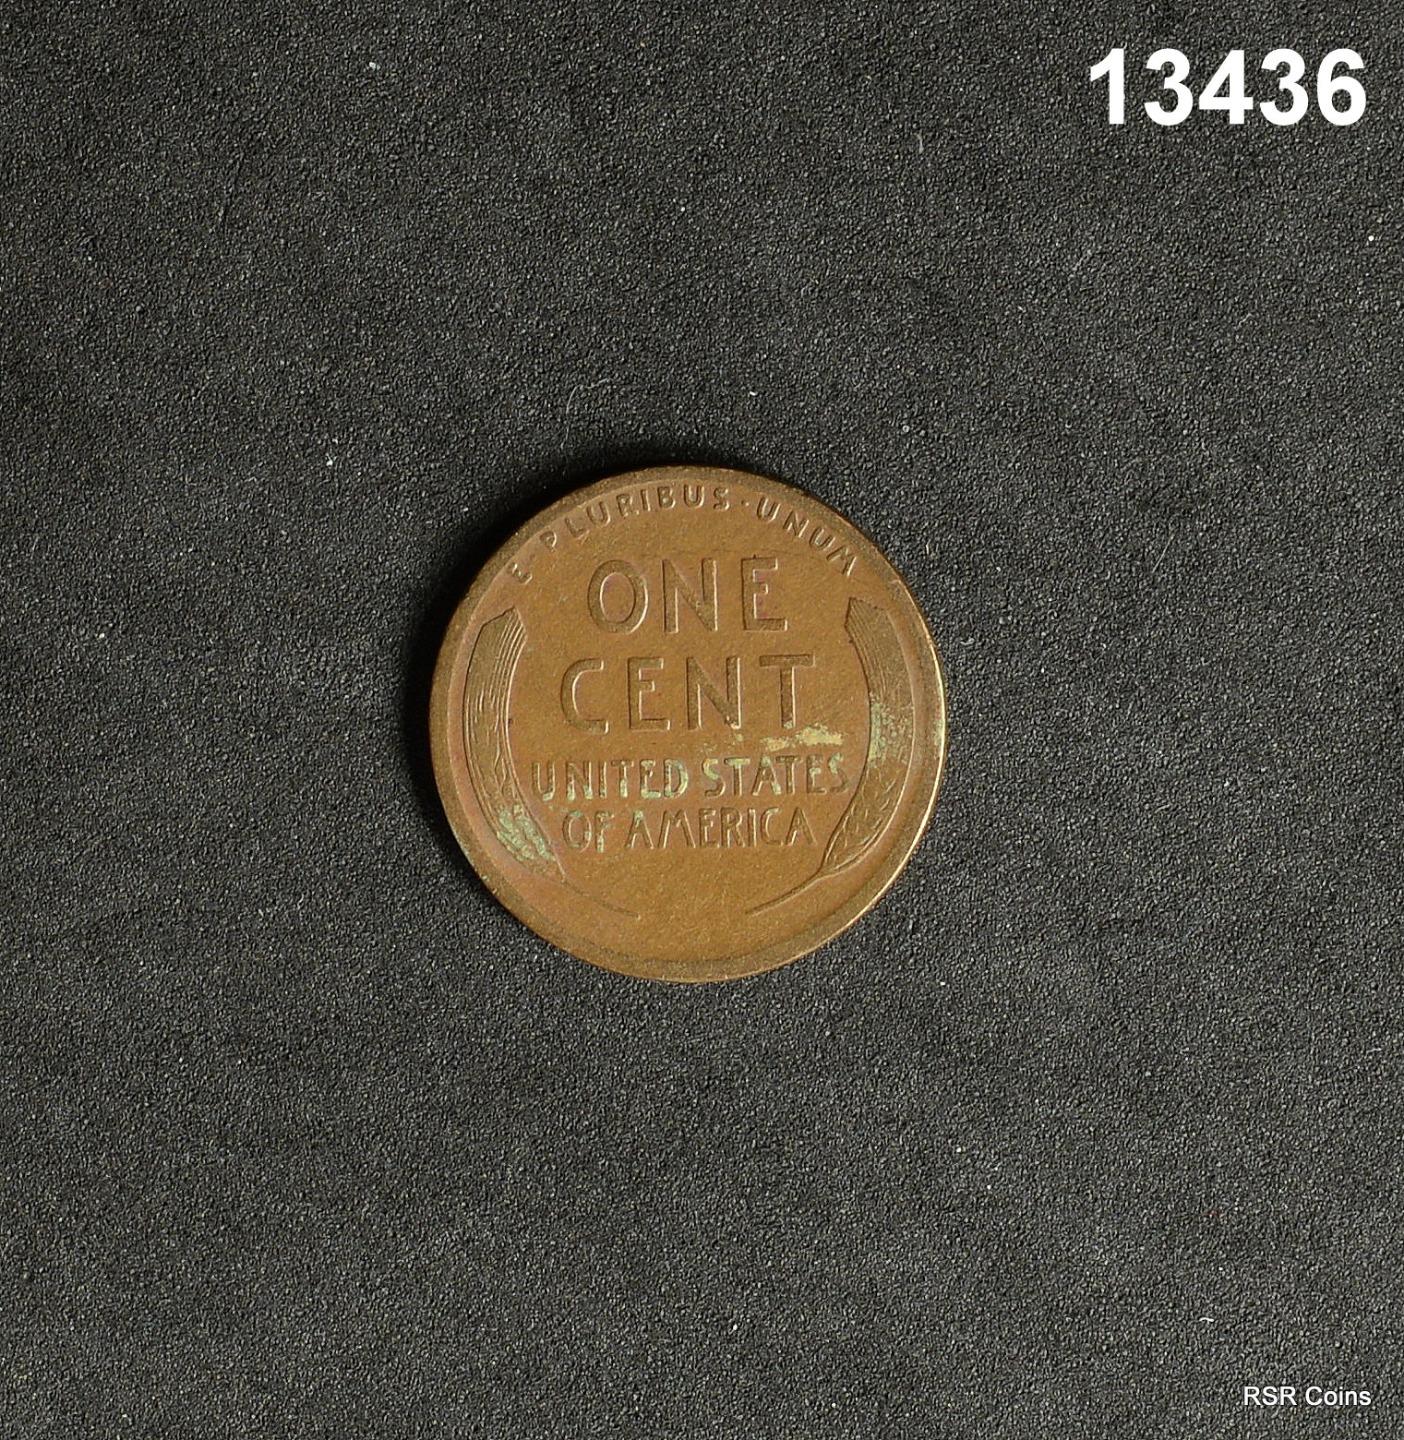 1915 S LINCOLN CENT VG! #13436